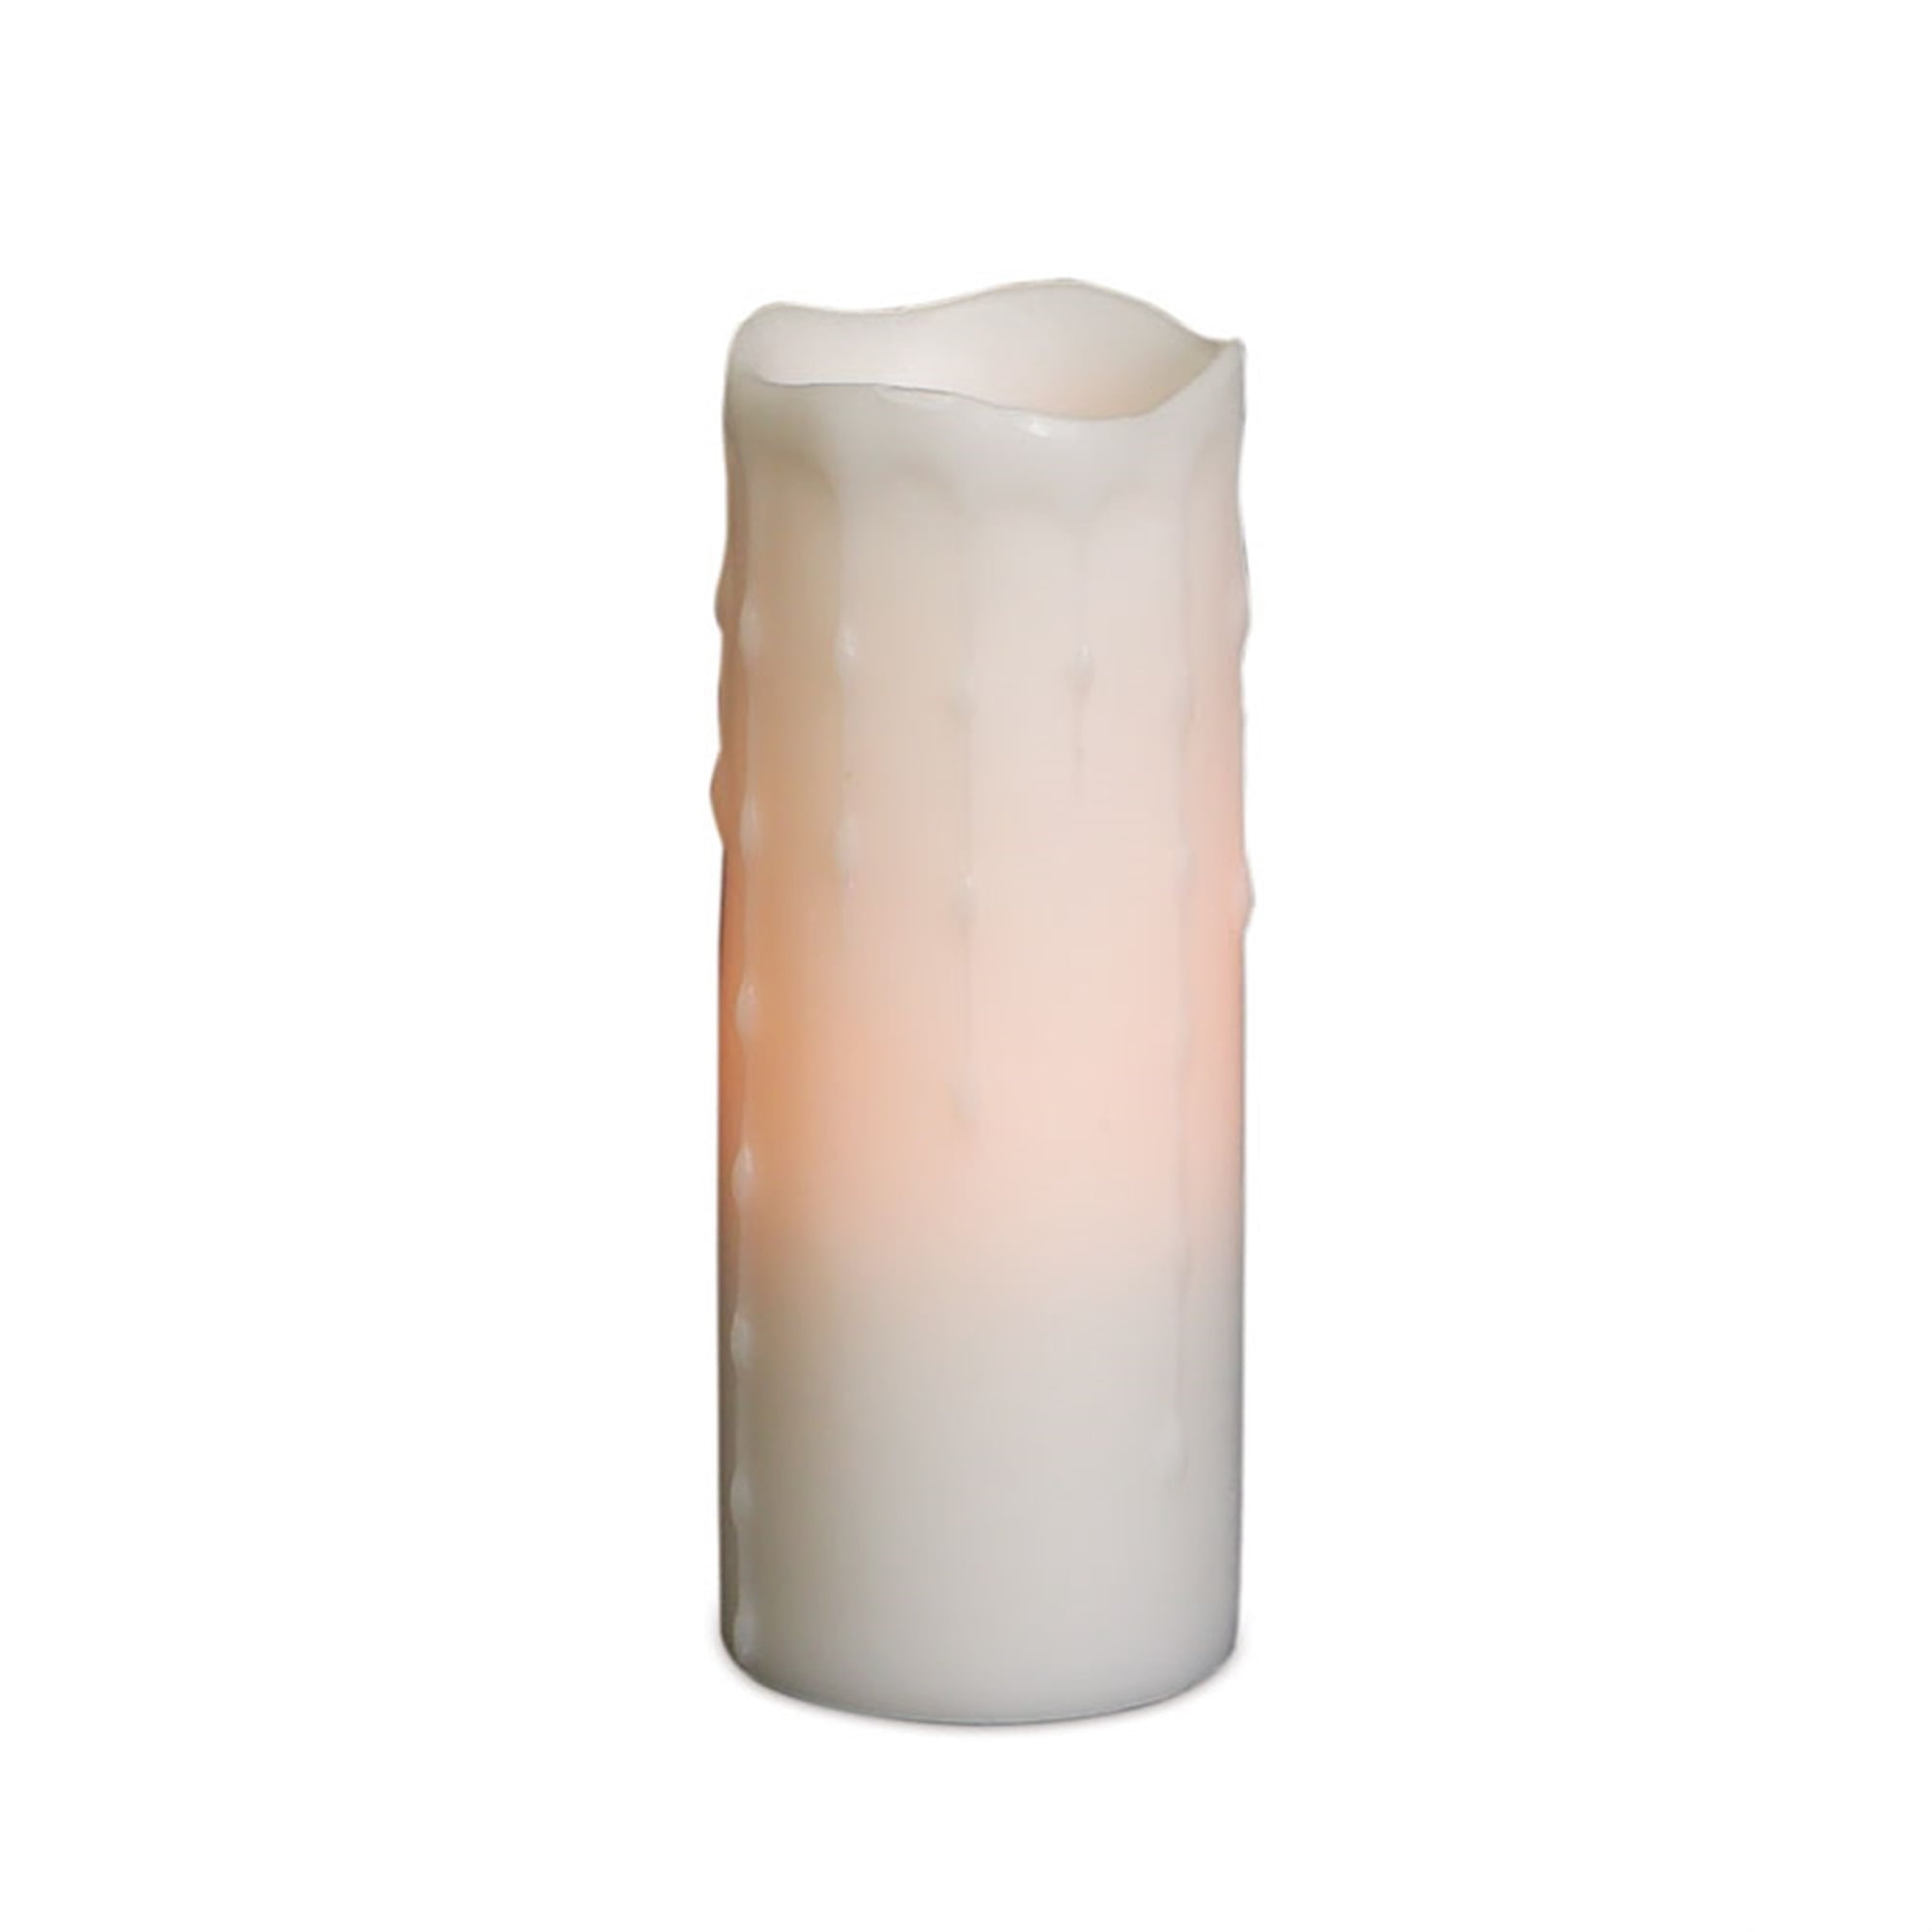 LED Wax Dripping Pillar Candle (Set of 3) 3"Dx8"H Wax/Plastic - 2 C Batteries Not Incld